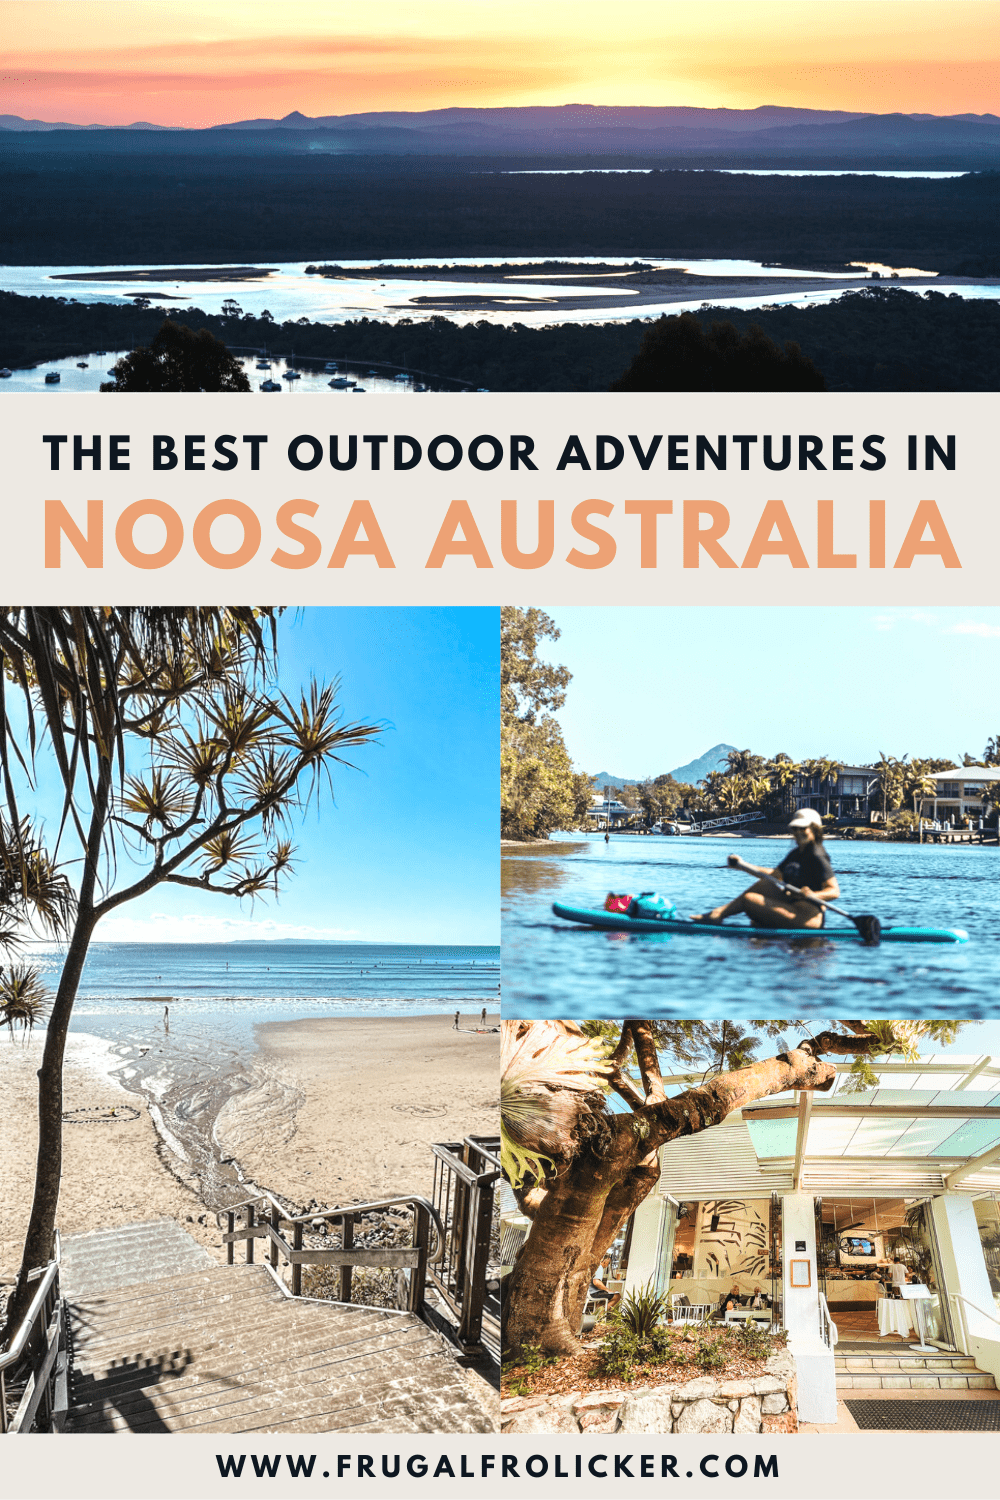 Things to do in Noosa, Australia